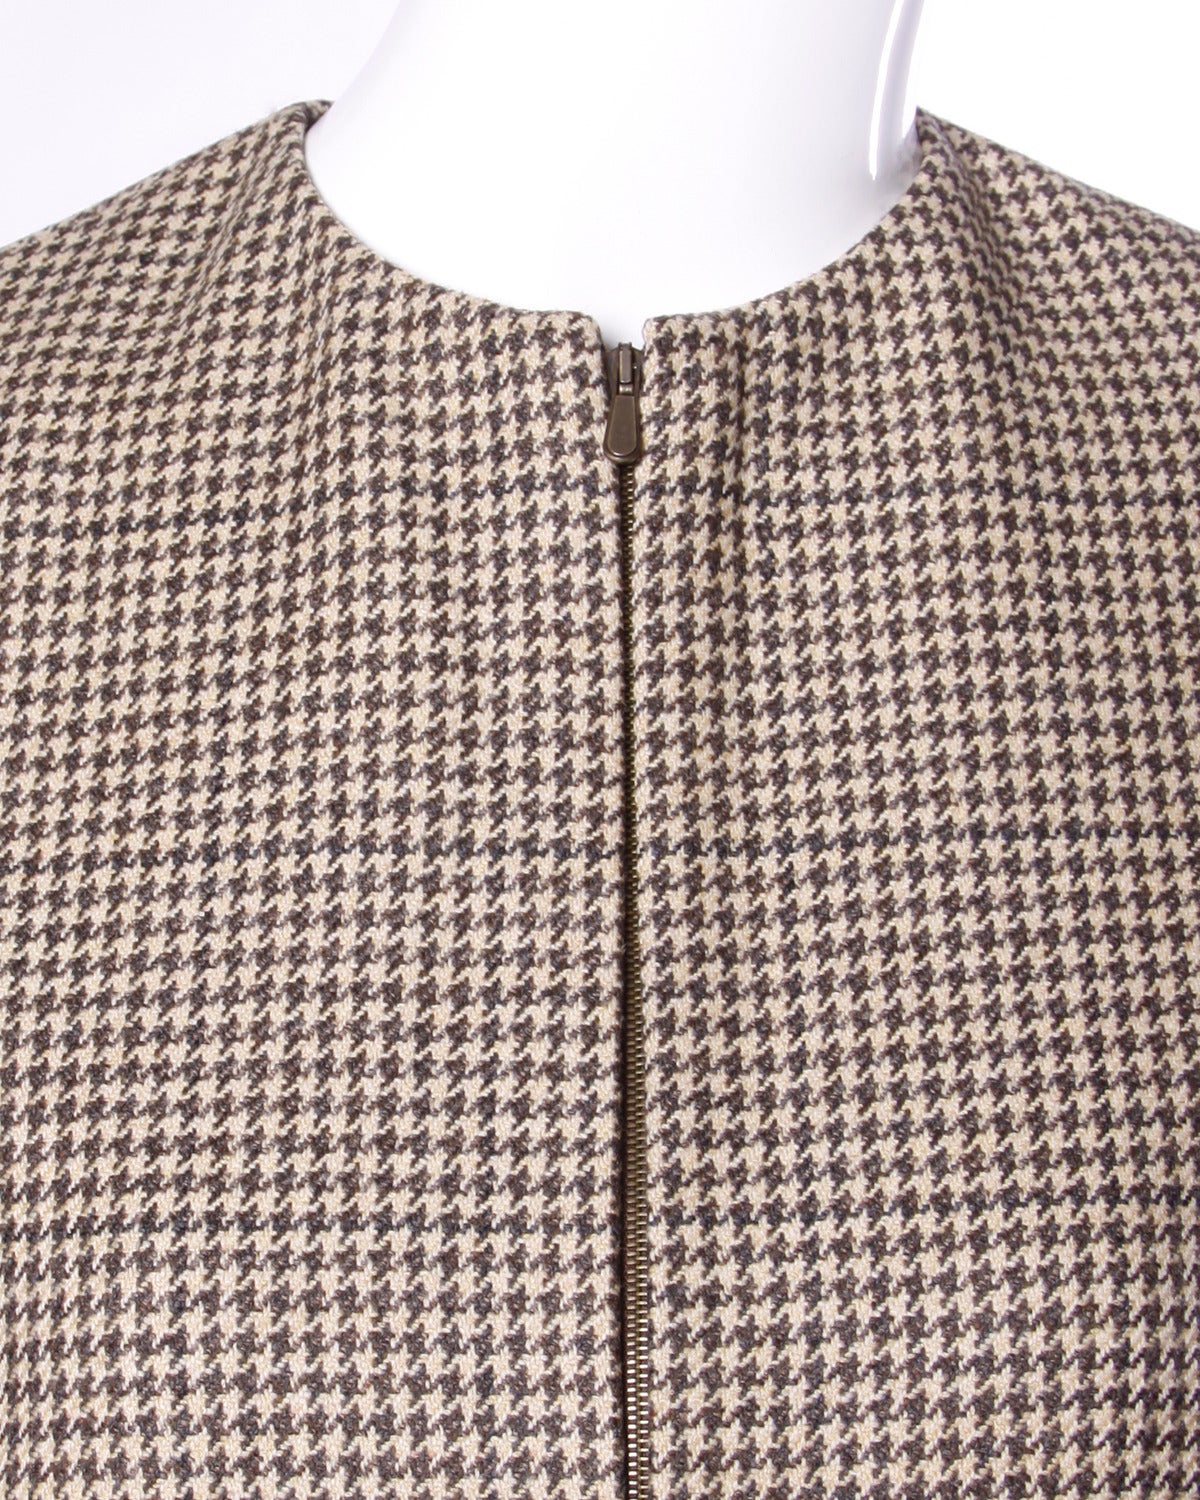 YSL two piece skirt suit in a hard-to-find larger size! Wool houndstooth minimalist design with classic clean tailoring.

Details:

Fully Lined
Side Pockets On Top
Front Zip Closure On Jacket/ Back Button and Zip Closure On Skirt
Color: Tan/